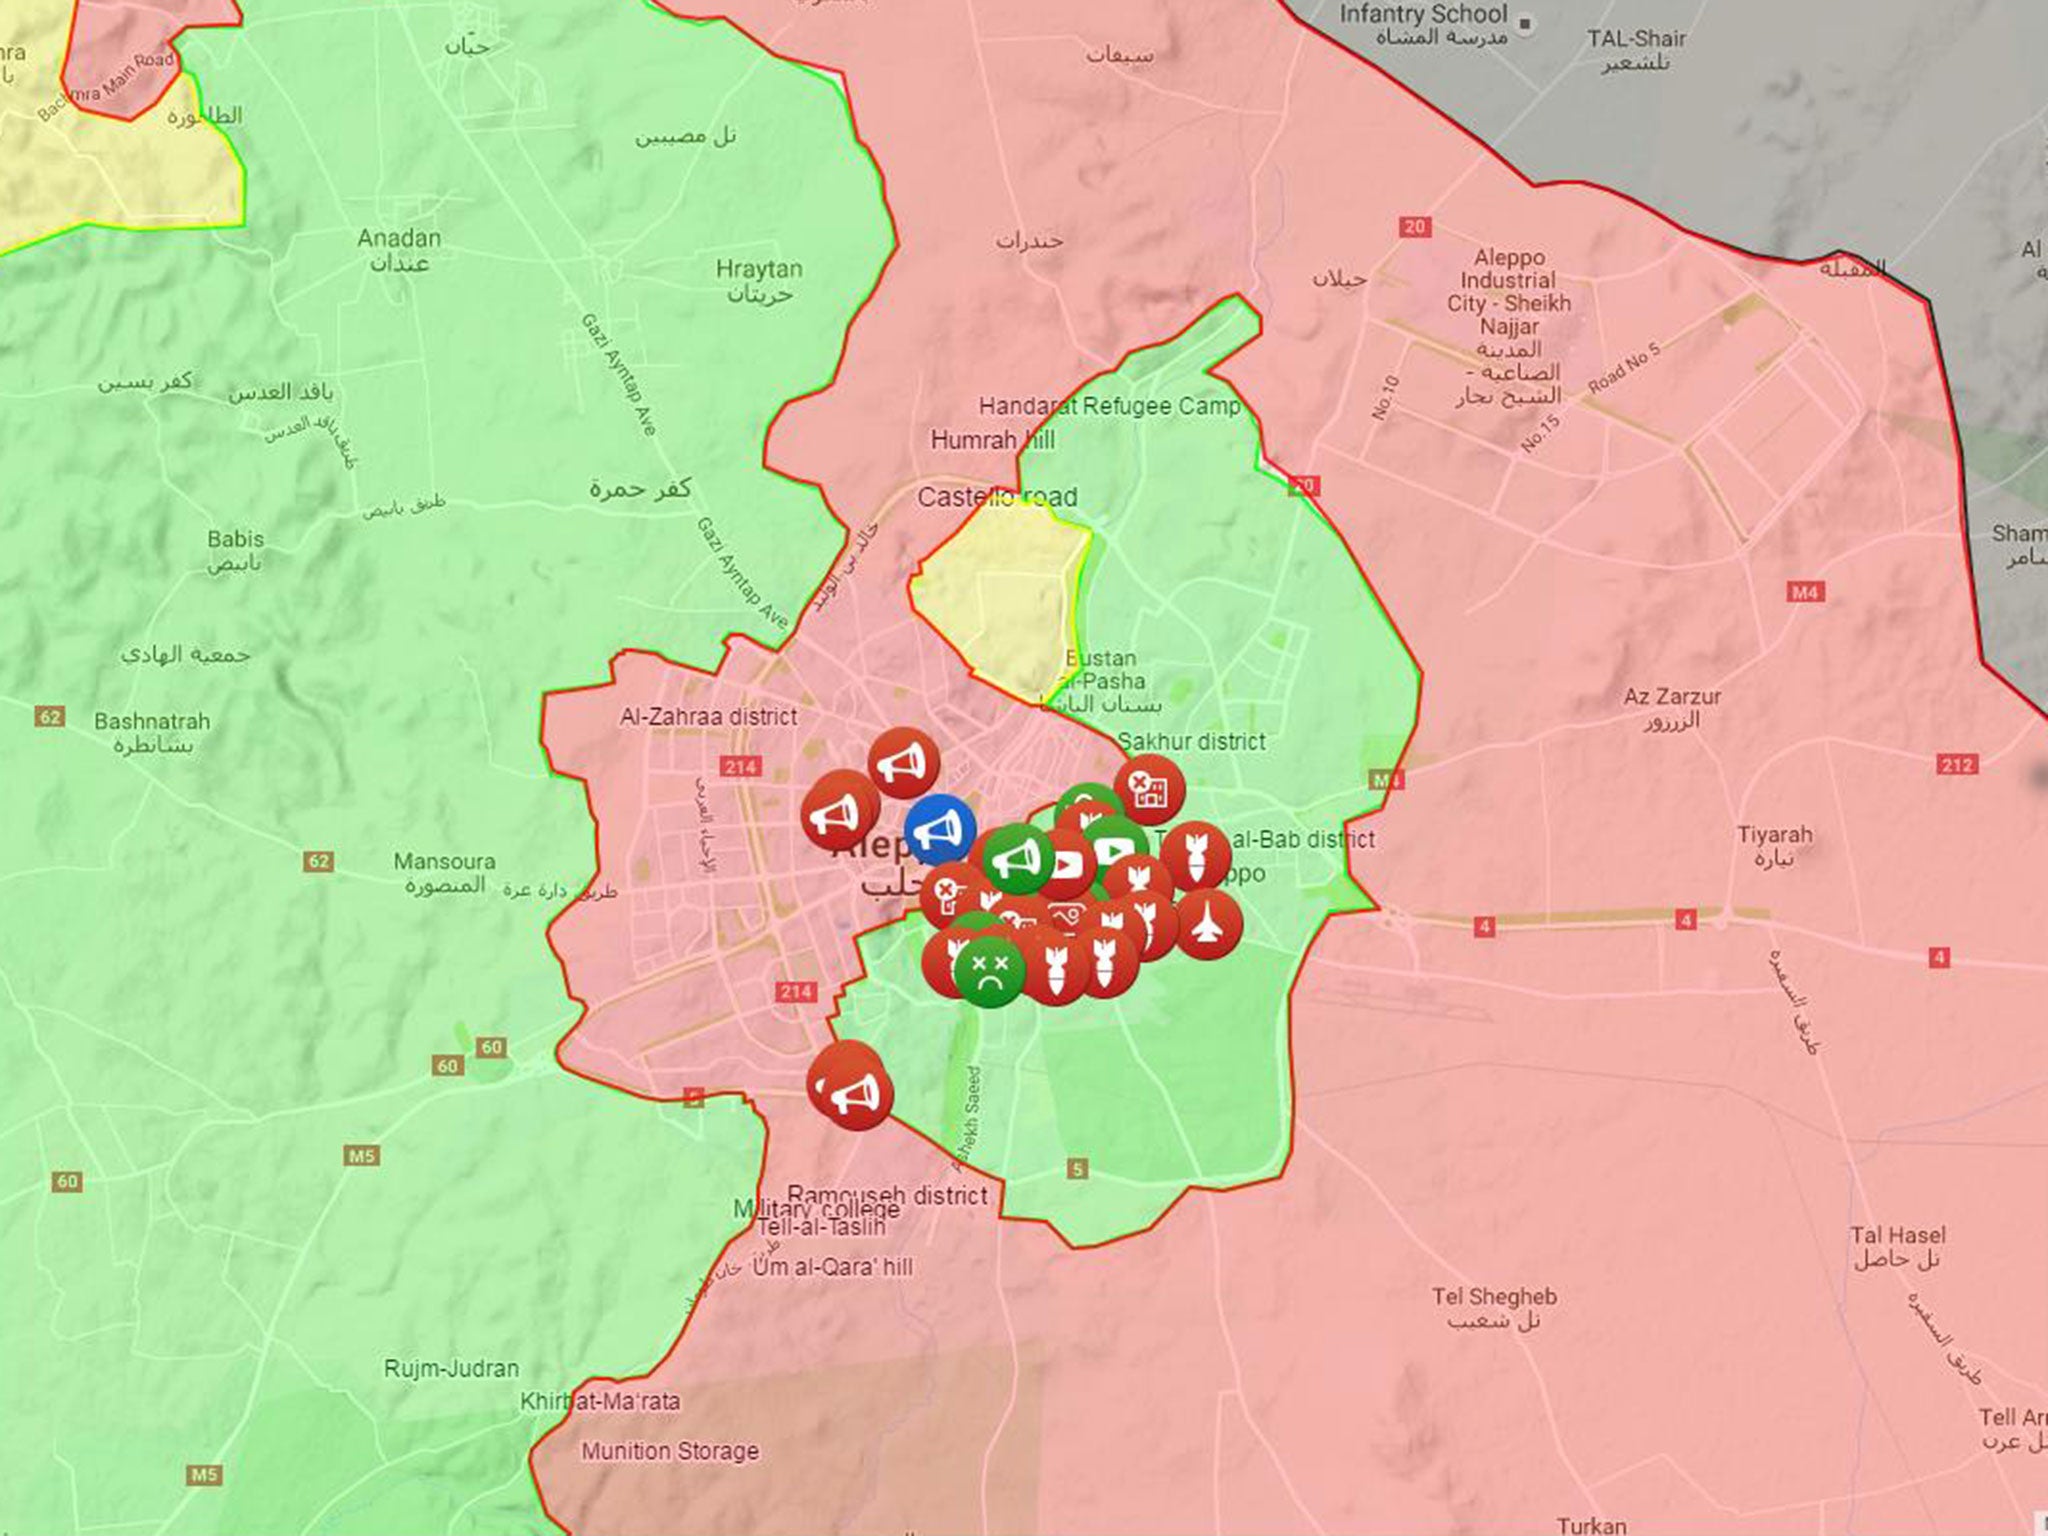 The situation in Aleppo on 23 September, with regime attacks and territory seen in red, rebels in green, Kurds in yellow and Isis in black